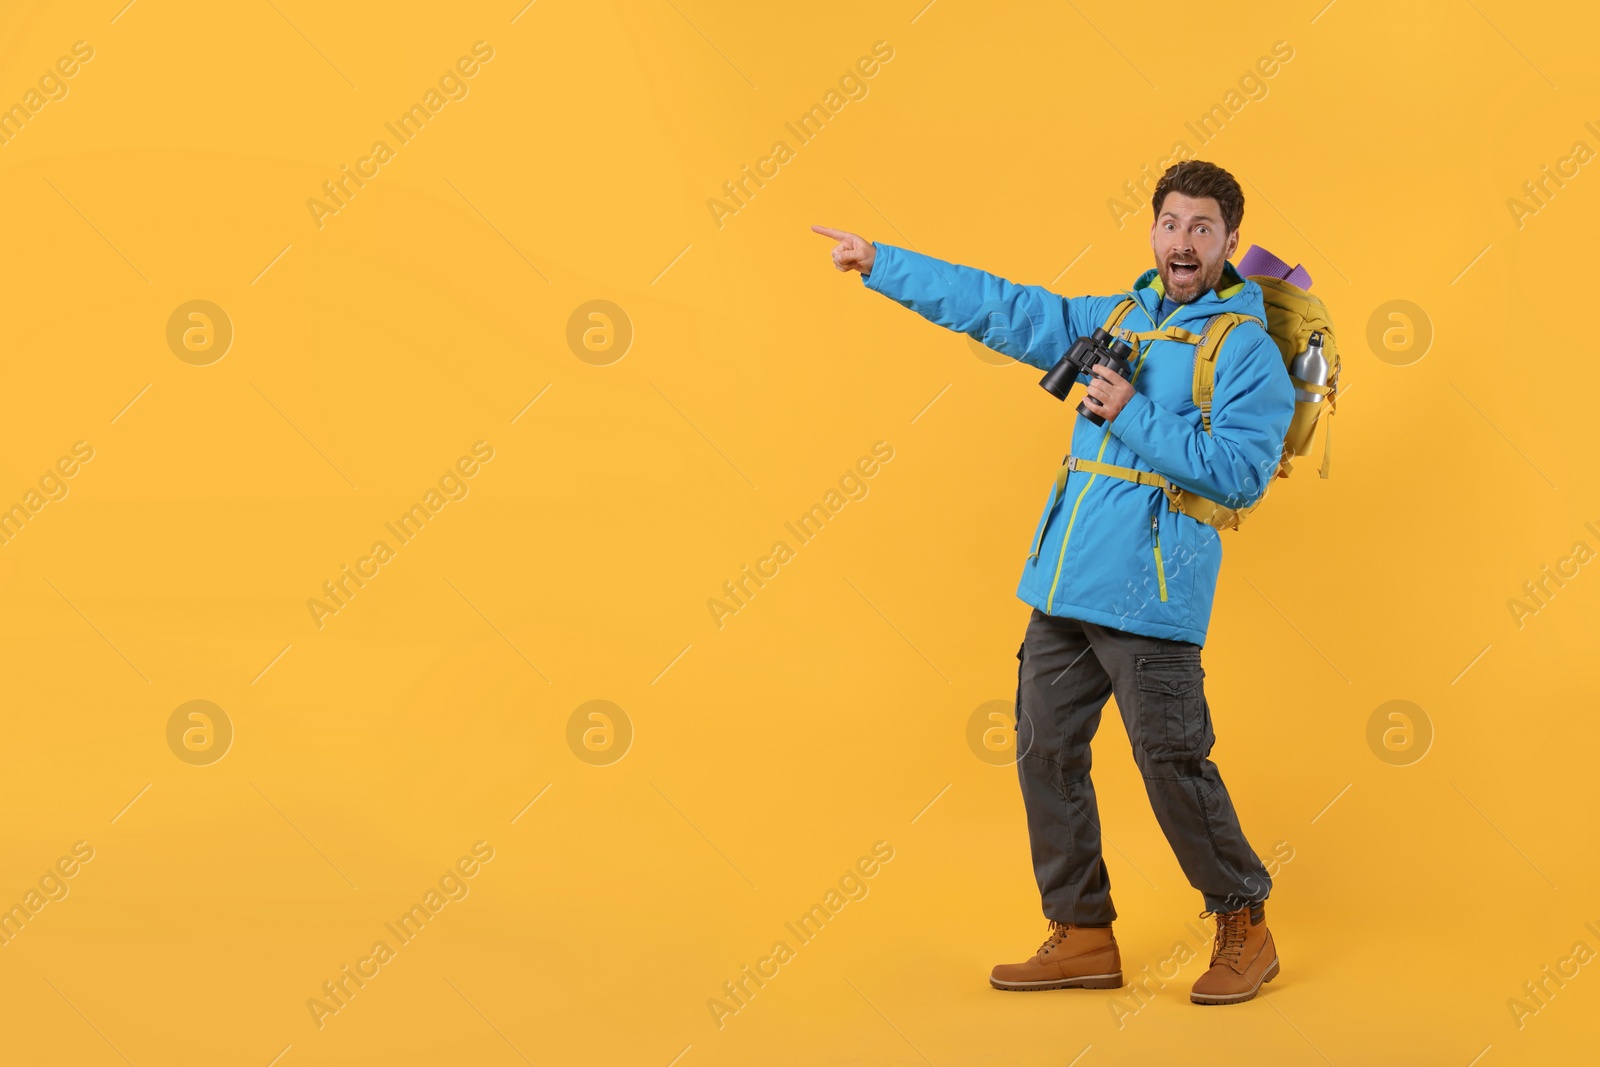 Photo of Emotional man with backpack and binoculars pointing at something on orange background, space for text. Active tourism